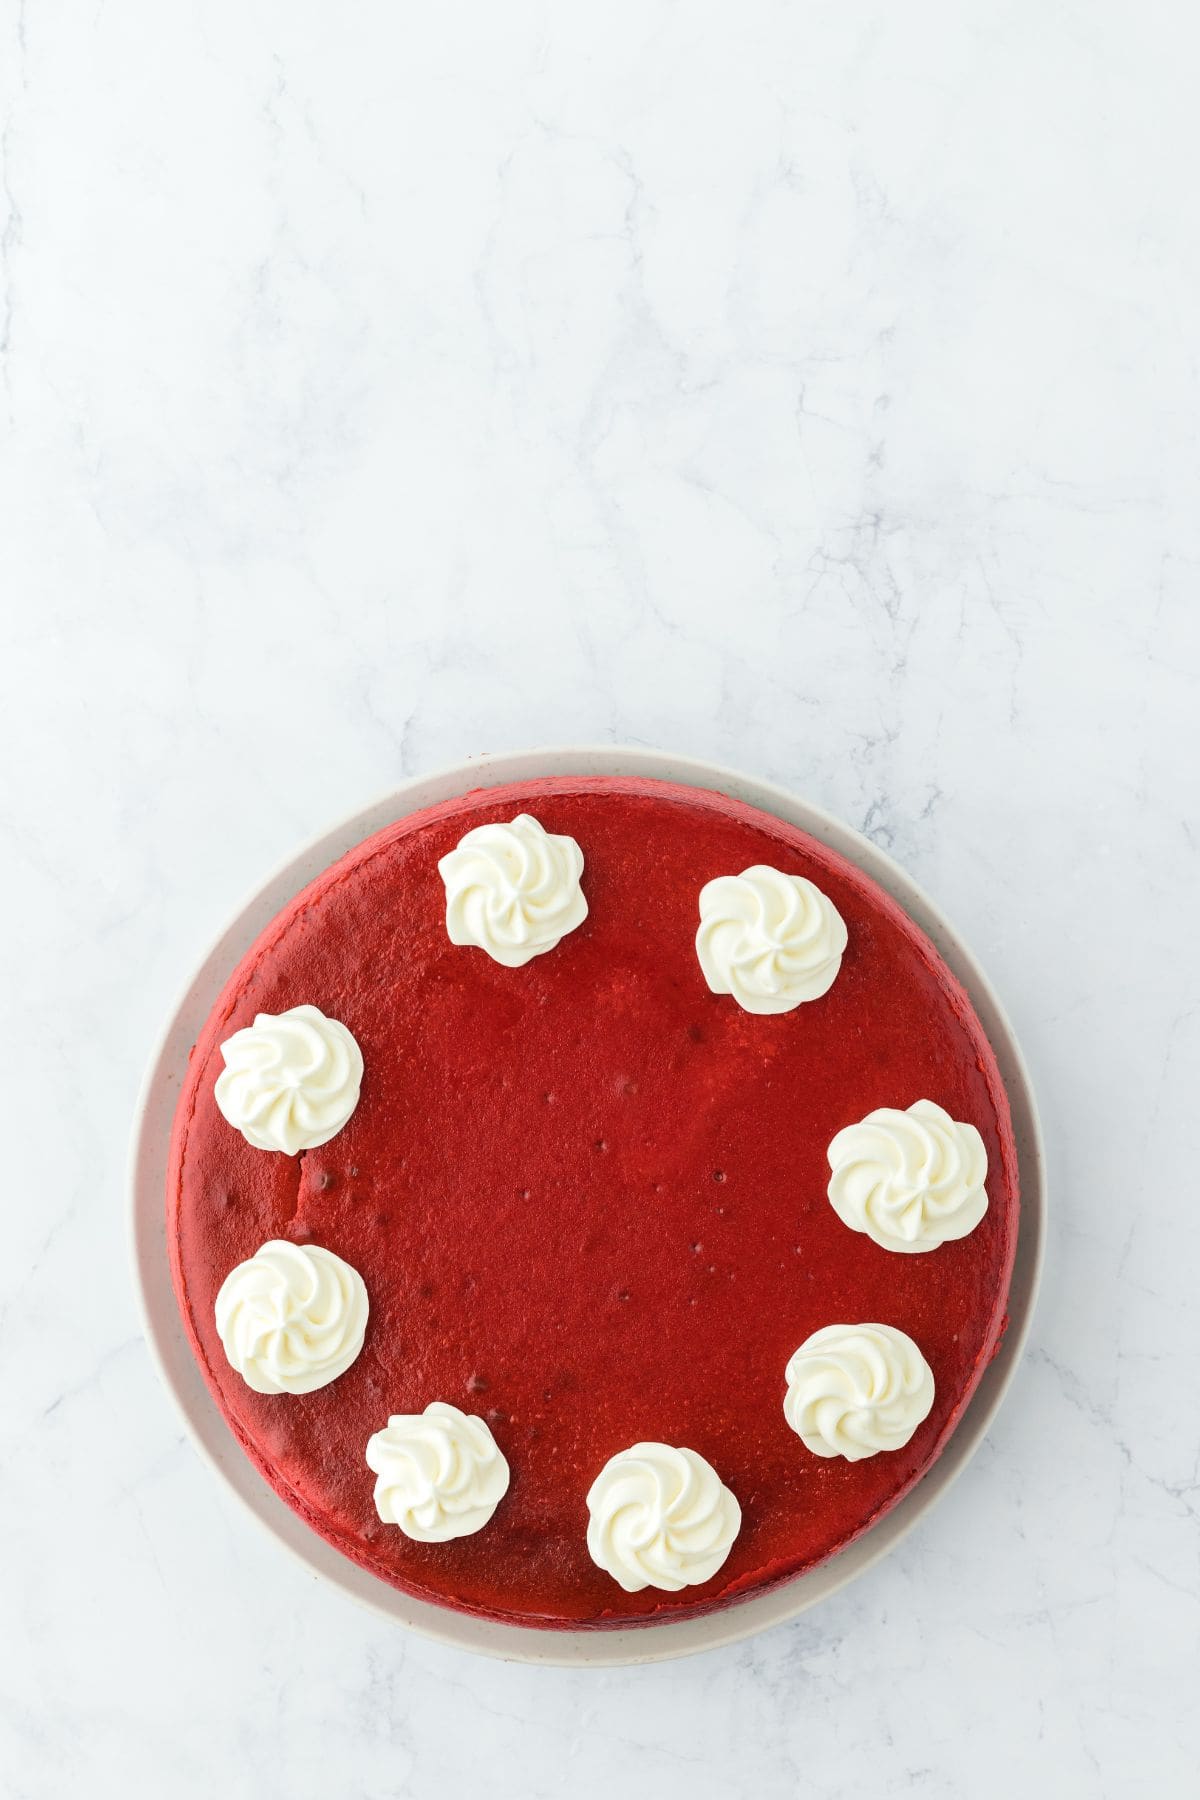 Whipped cream rosettes piped onto the top of a red velvet cheesecake.